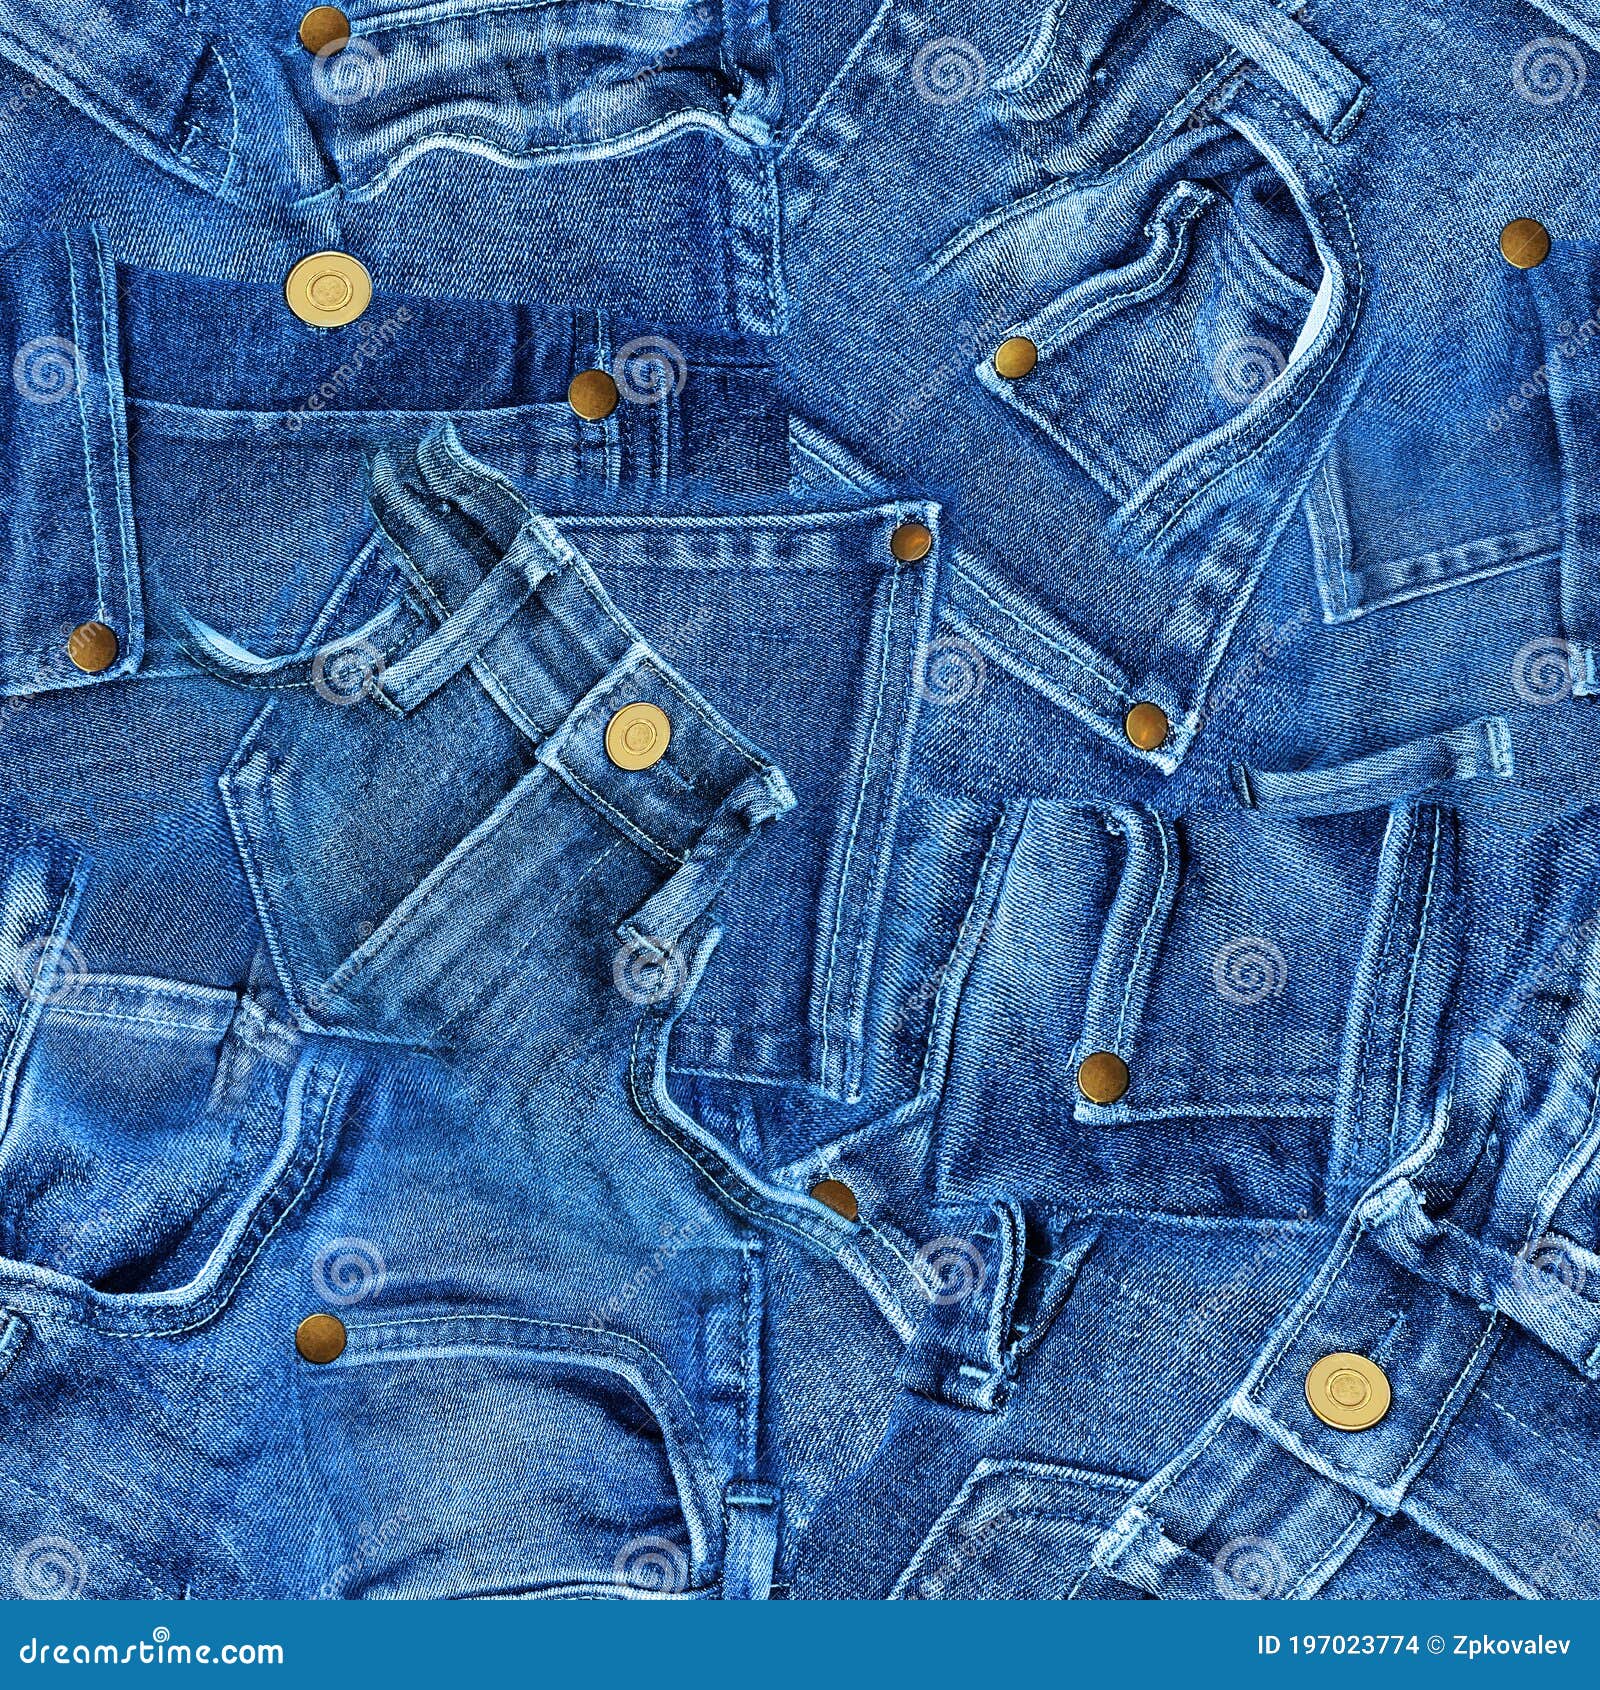 Seamless Pattern of Real Denim Pants. Blue Jeans Patchwork Texture with ...